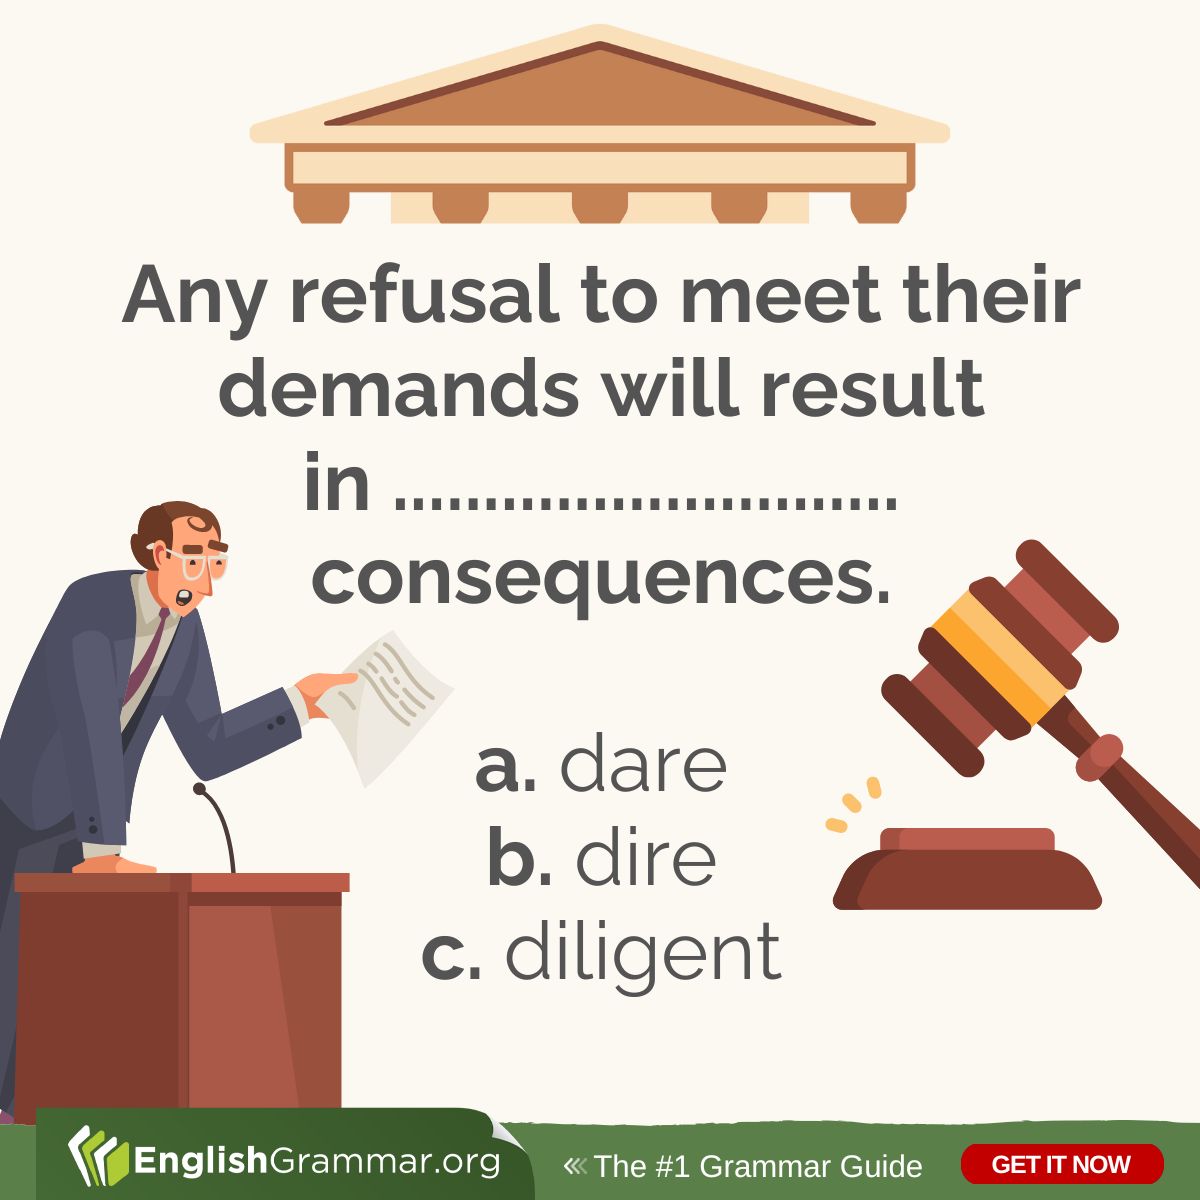 What do you think? Find the right answer here: englishgrammar.org/english-vocabu… #writing #amwriting #grammar